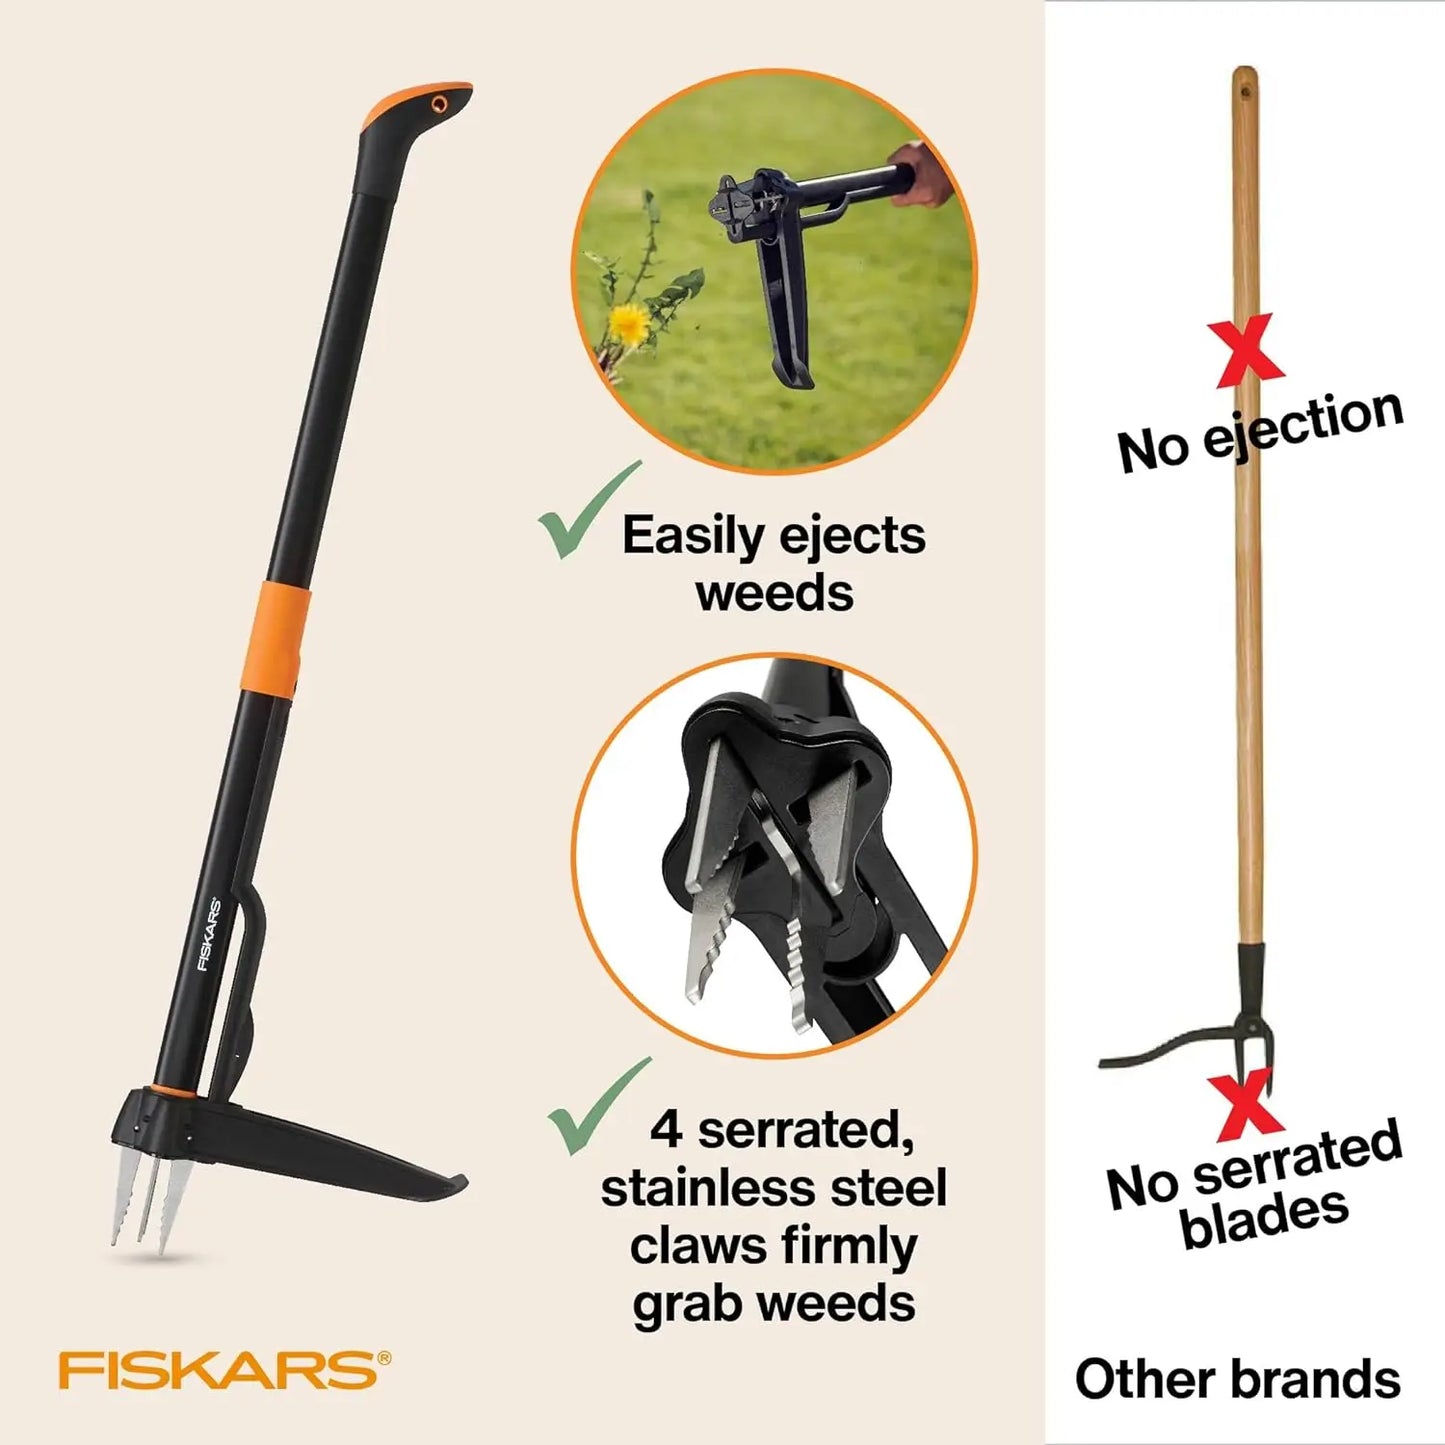 4-Claw Stand Up Weeder - Gardening Hand Weeding Tool with 39" Long Ergonomic Handle - Easy-Eject Mechanism